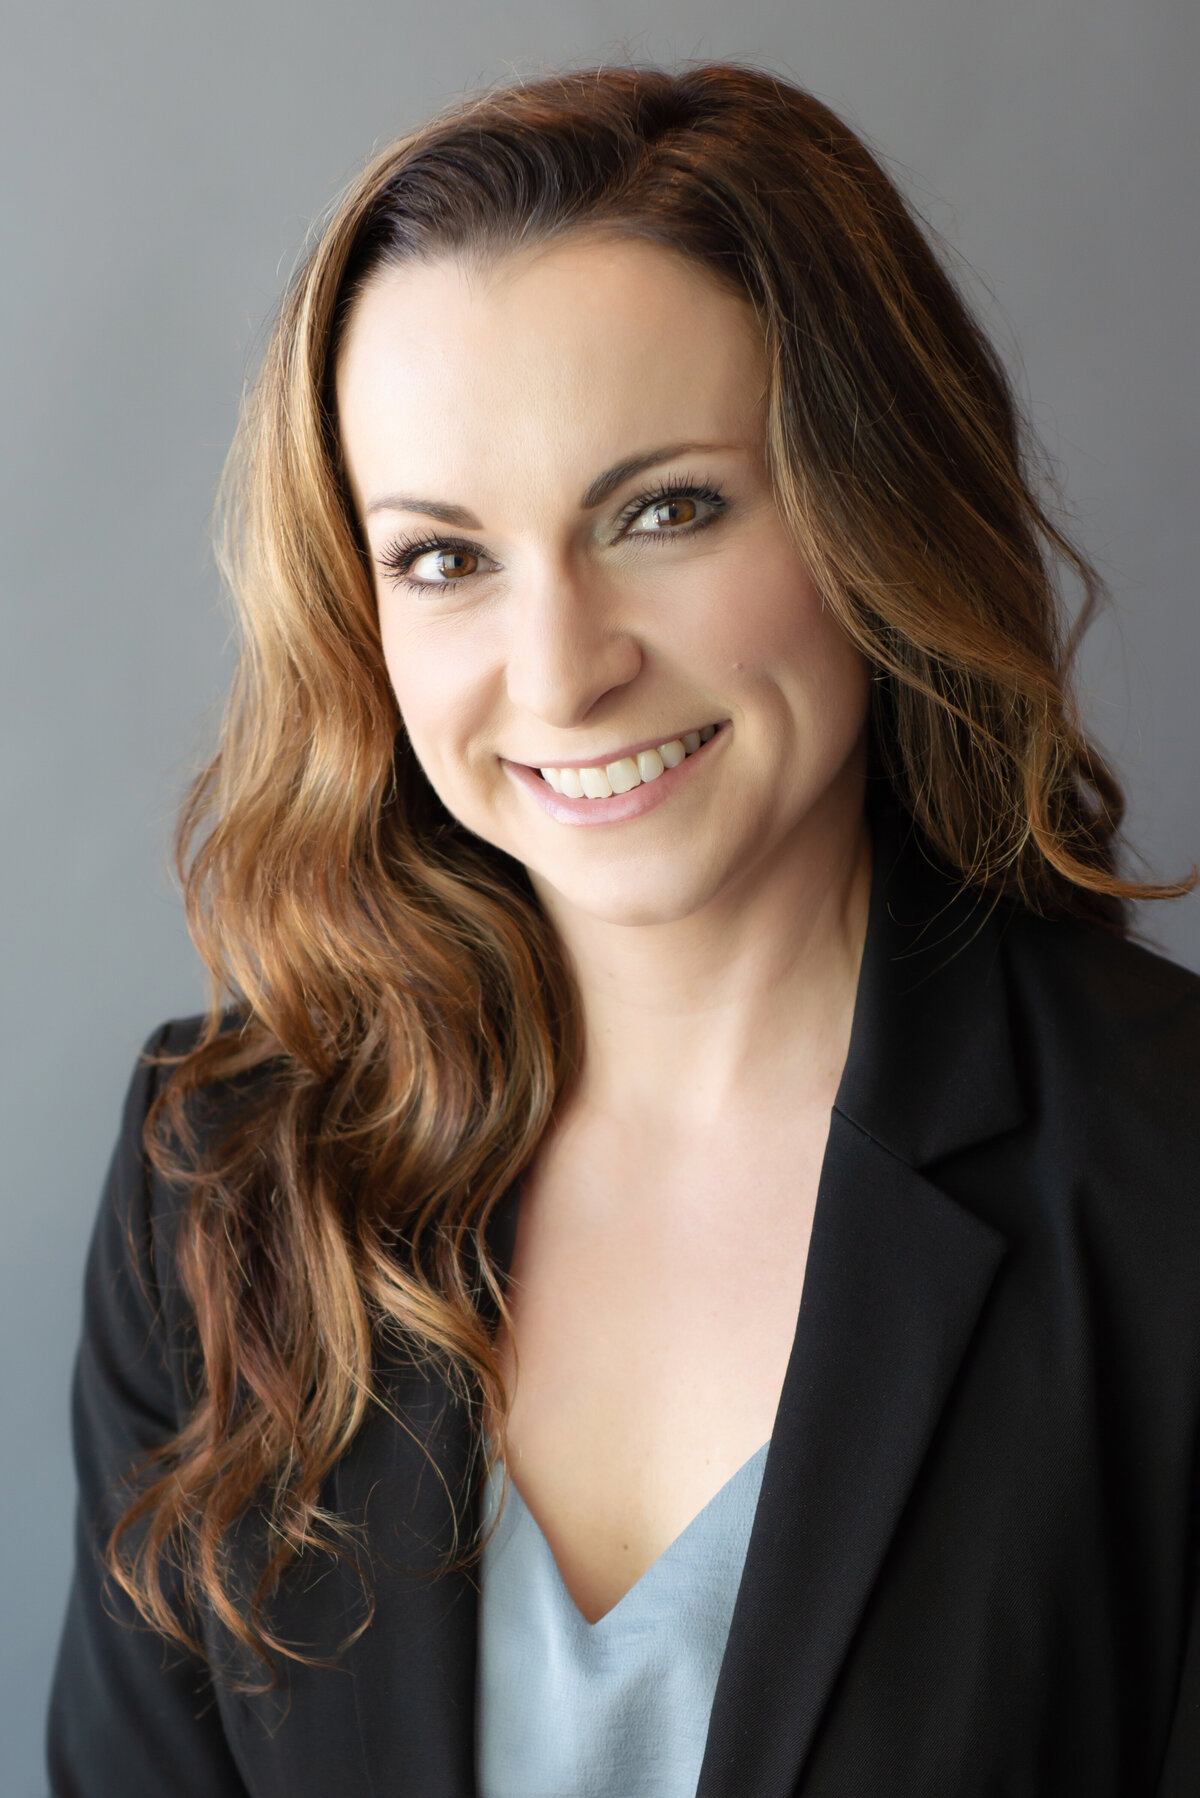 Headshot of woman in business suit